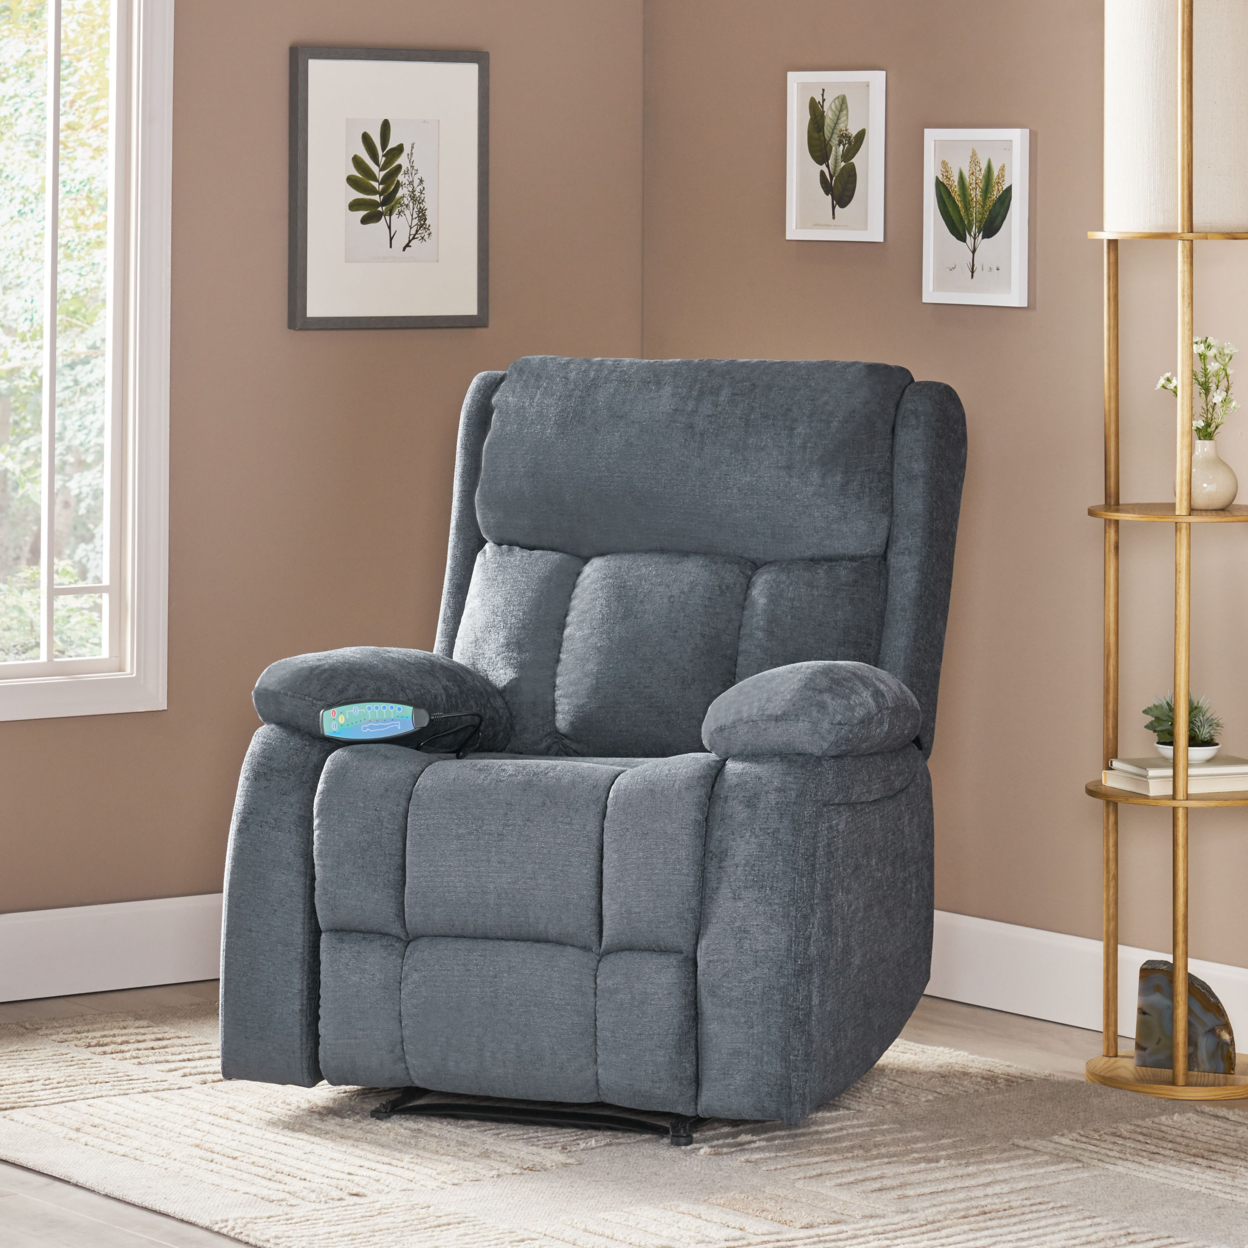 Lexie Contemporary Pillow Tufted Massage Recliner - Black/charcoal